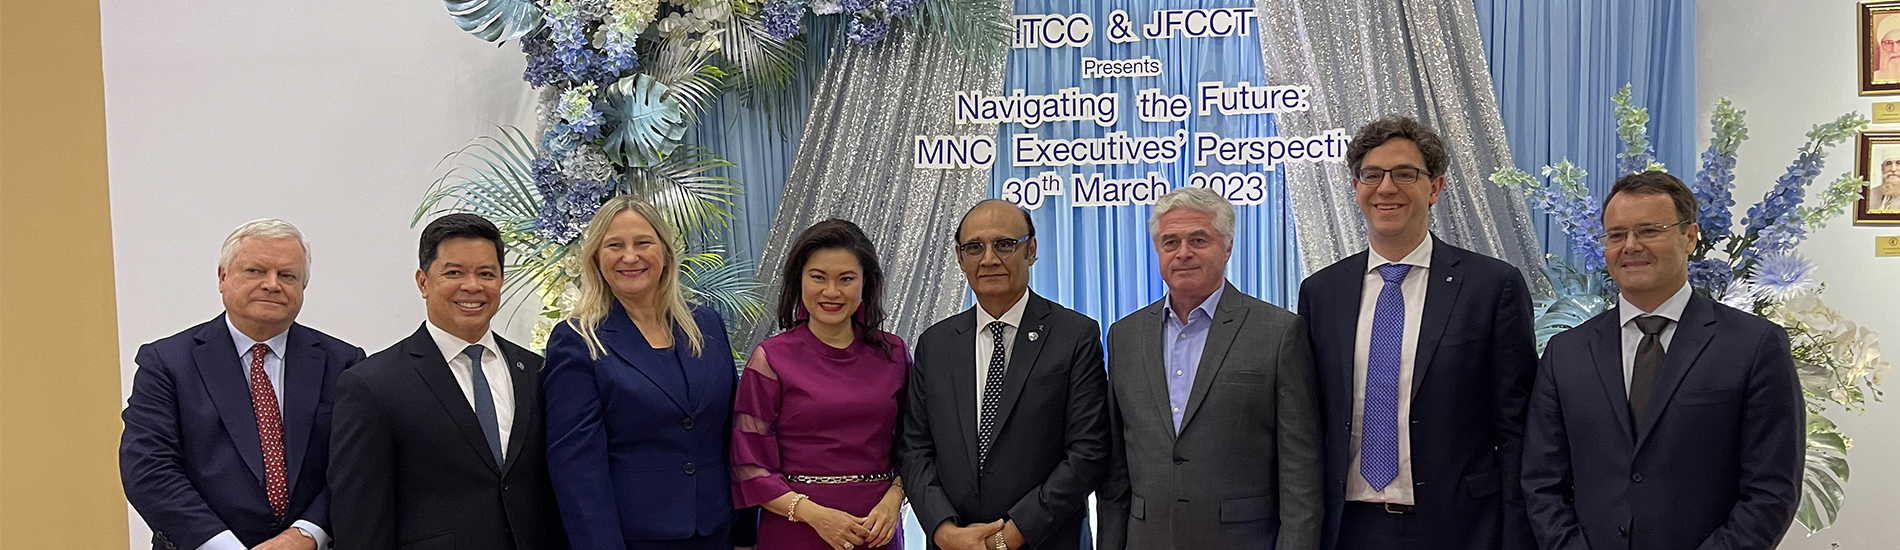 ITCC & JFCCT Event, Navigating the Future by MNCs Executives' Perspective